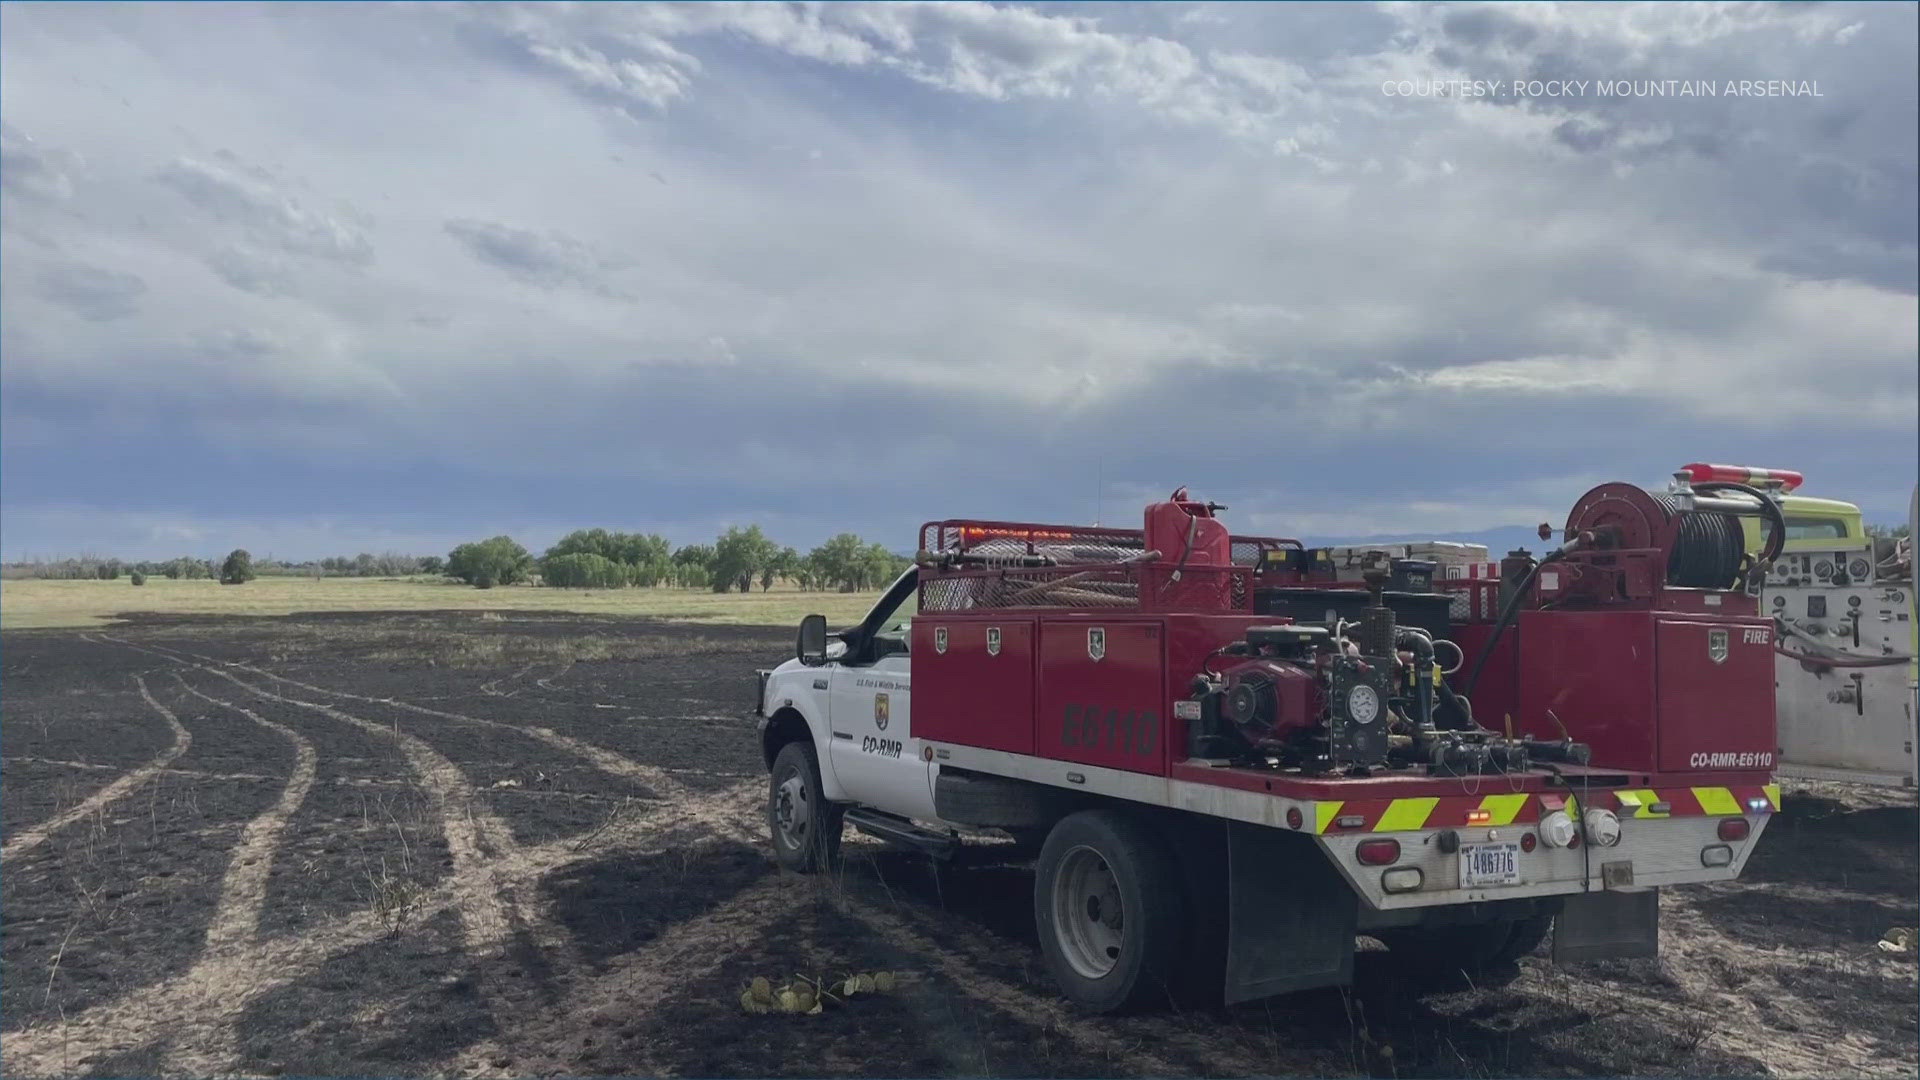 The fire at the wildlife refuge grew to about 12-15 acres before it was contained Saturday.